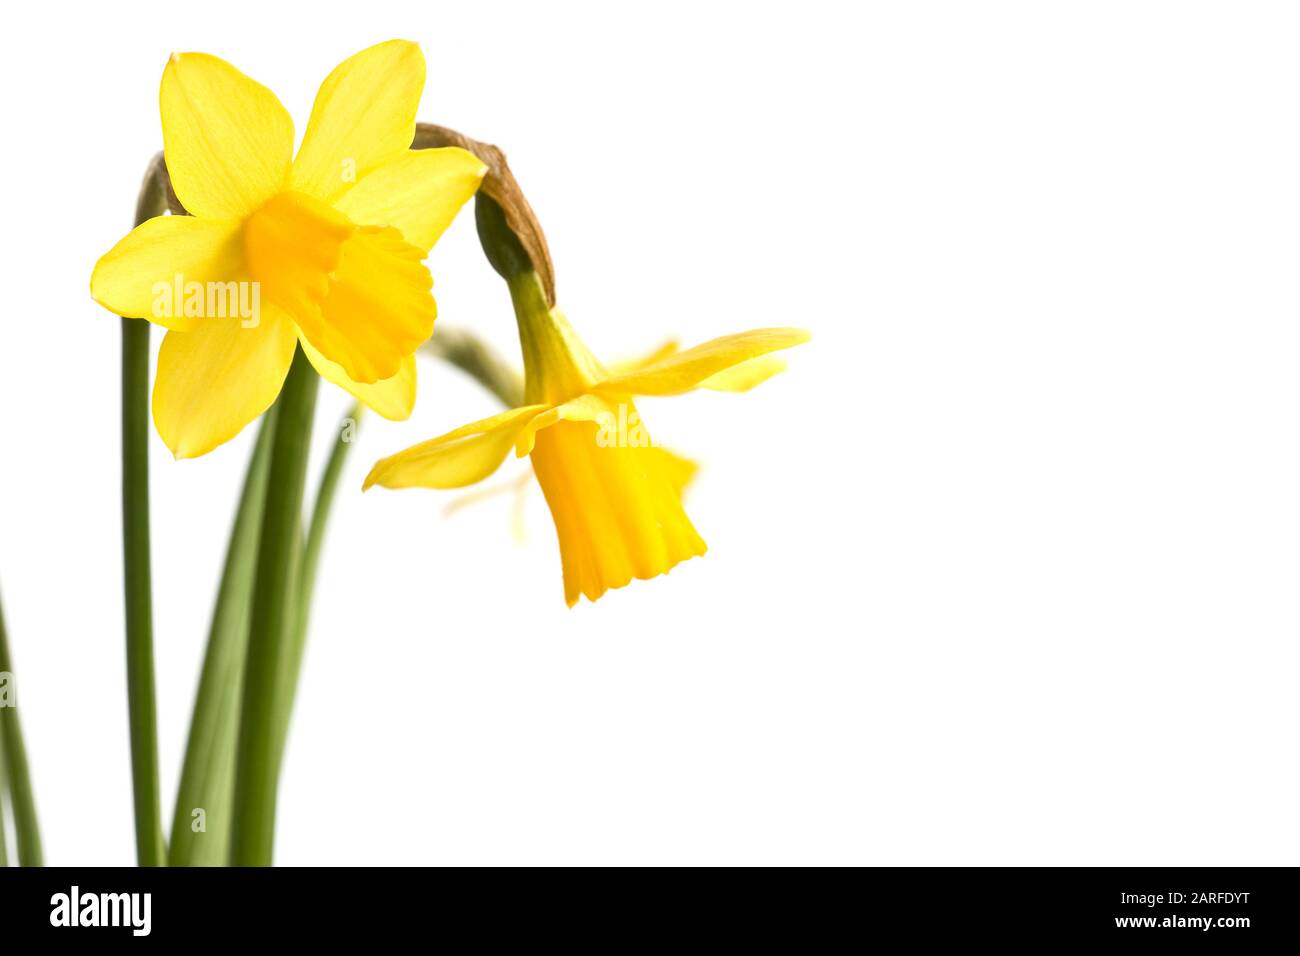 Daffodils close up, isolated on white background Stock Photo